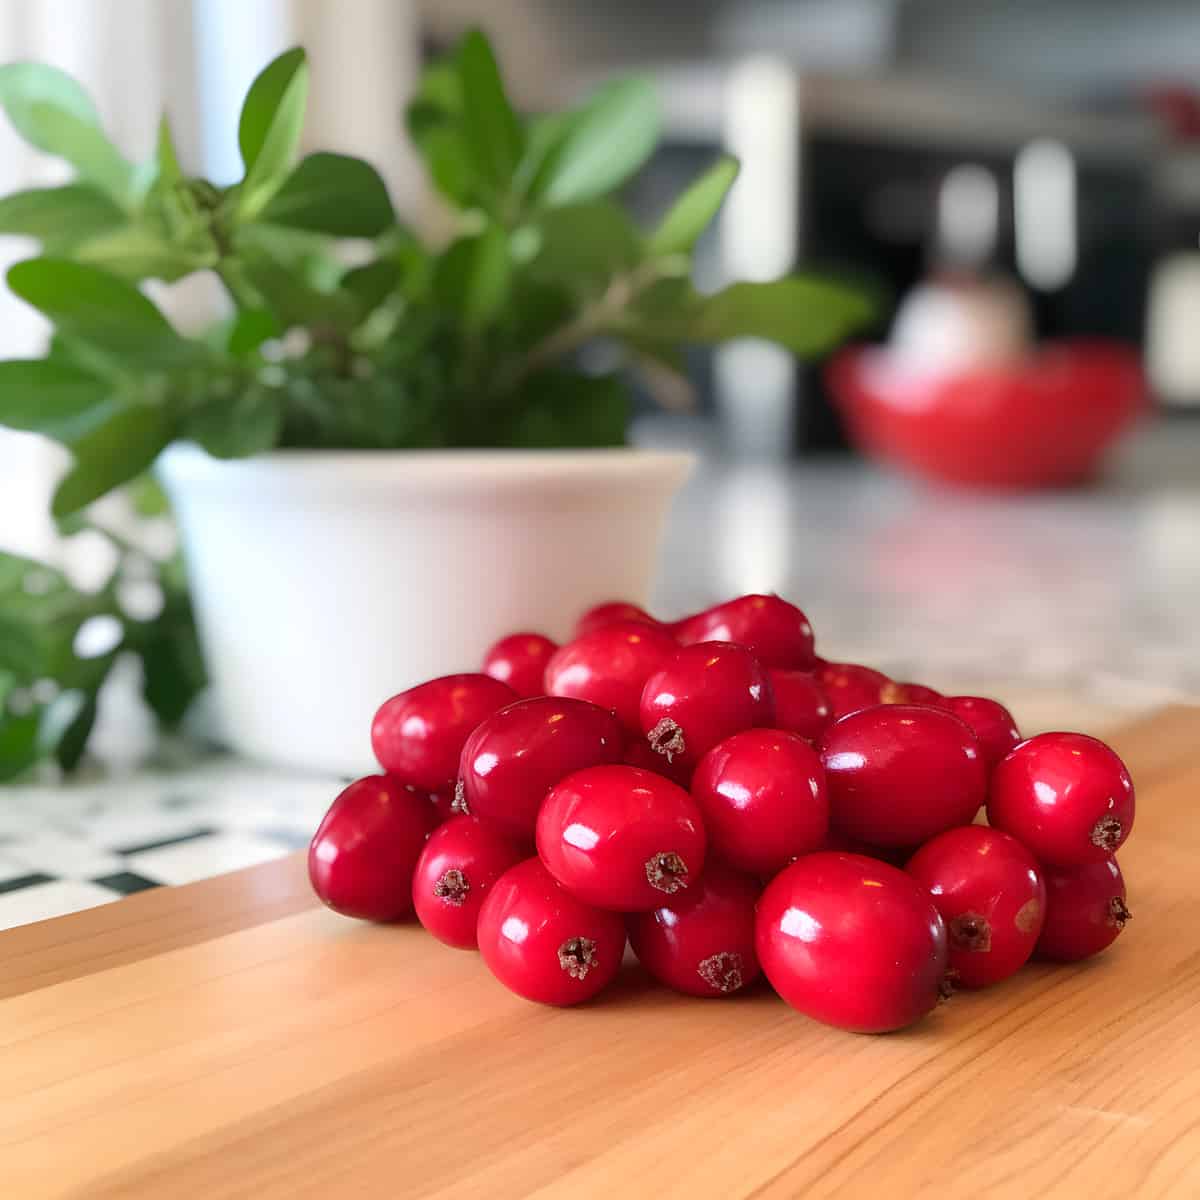 Lingonberry on a kitchen counter